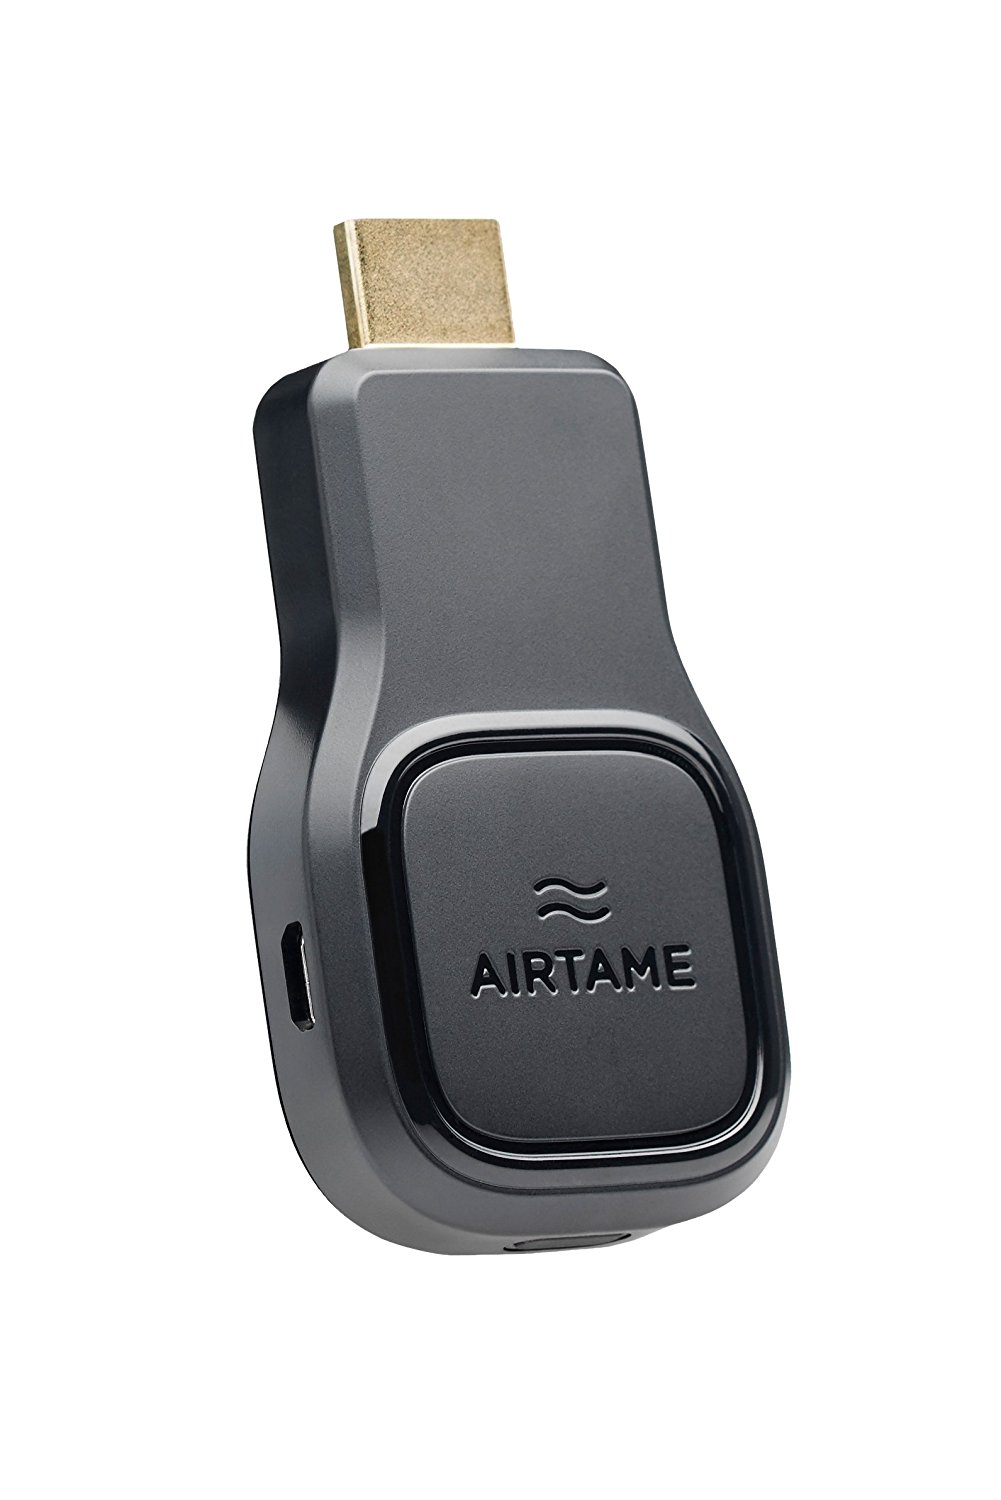 Airtame Wireless HDMI Review